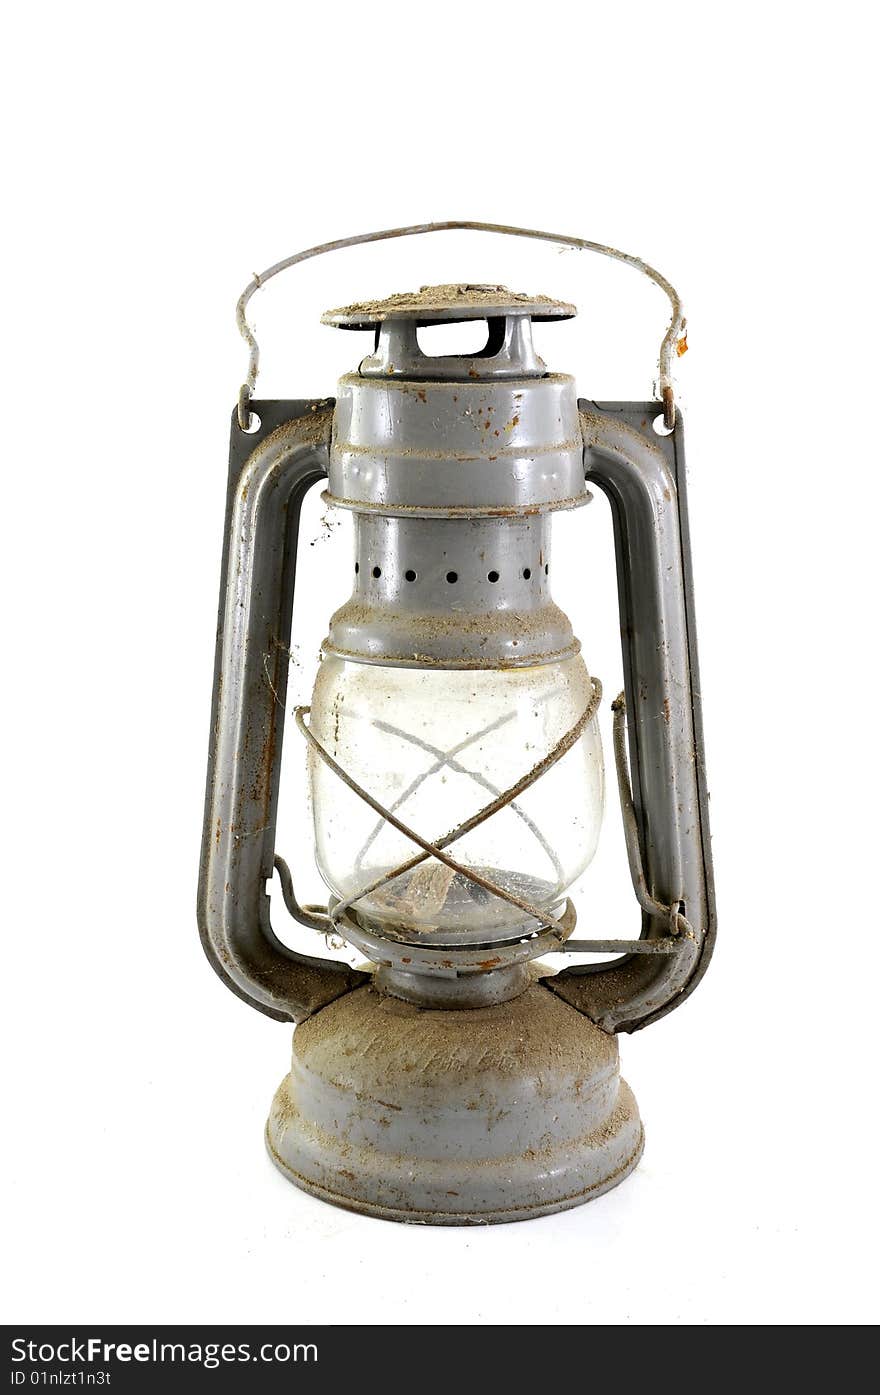 Vintage petroleum lamp isolated on a white background. Vintage petroleum lamp isolated on a white background